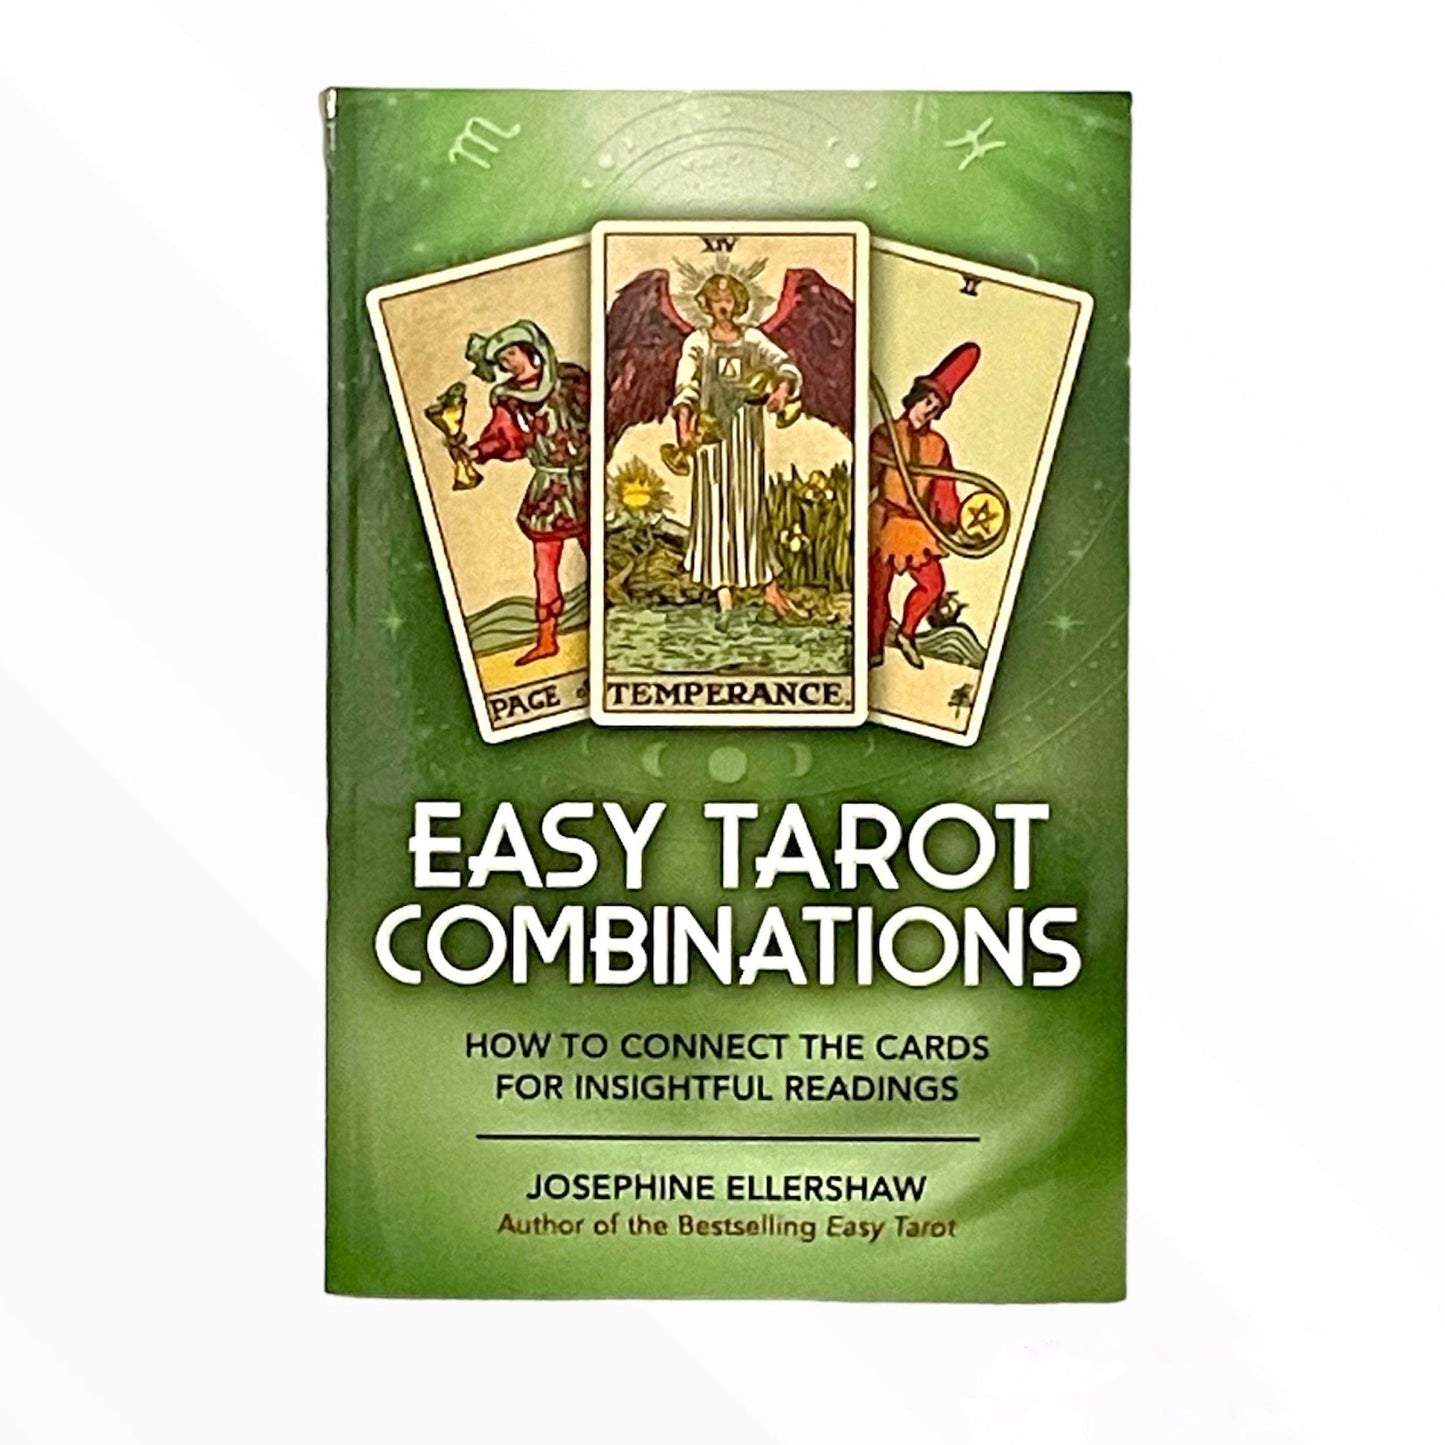 Load image into Gallery viewer, Easy Tarot Combinations: How to Connect the Cards for Insightful Readings by Josephine Ellershaw
